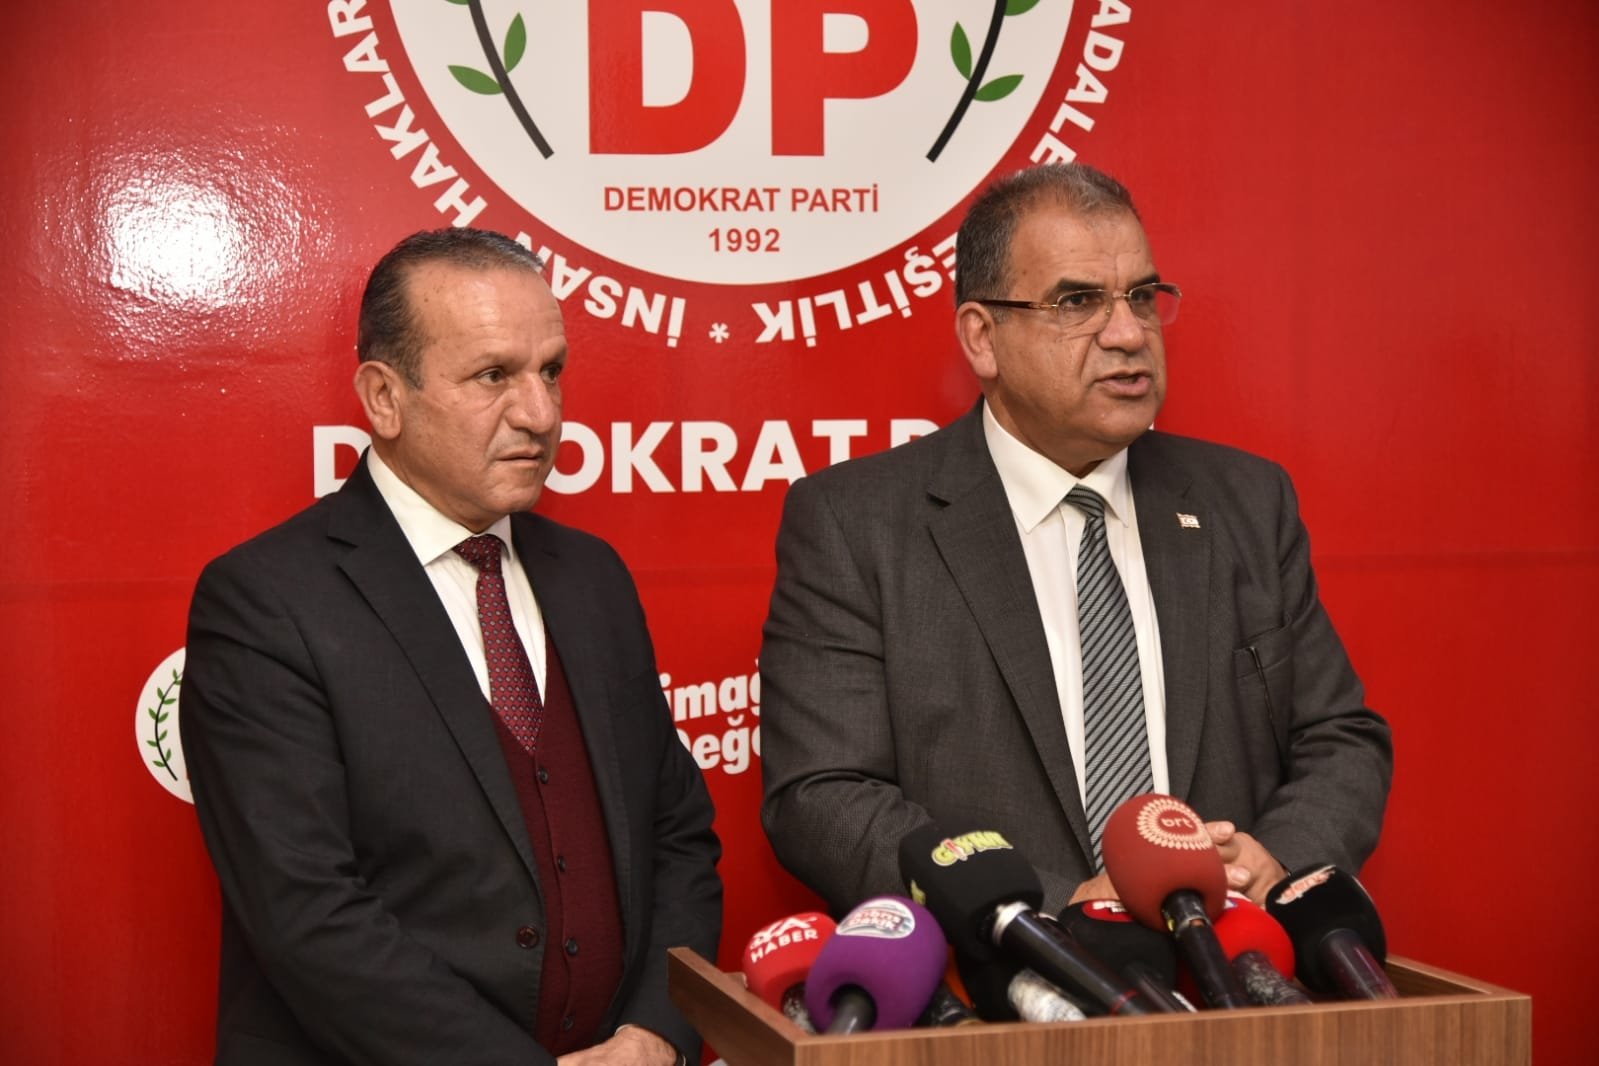 Prime Minister of the Turkish Republic of Northern Cyprus (TRNC) Faiz Sucuoğlu (R) and Democratic Party Chairperson Fikri Ataoğlu come together in Nicosia (Lefkoşa), TRNC, Feb. 9, 2022. (AA Photo)